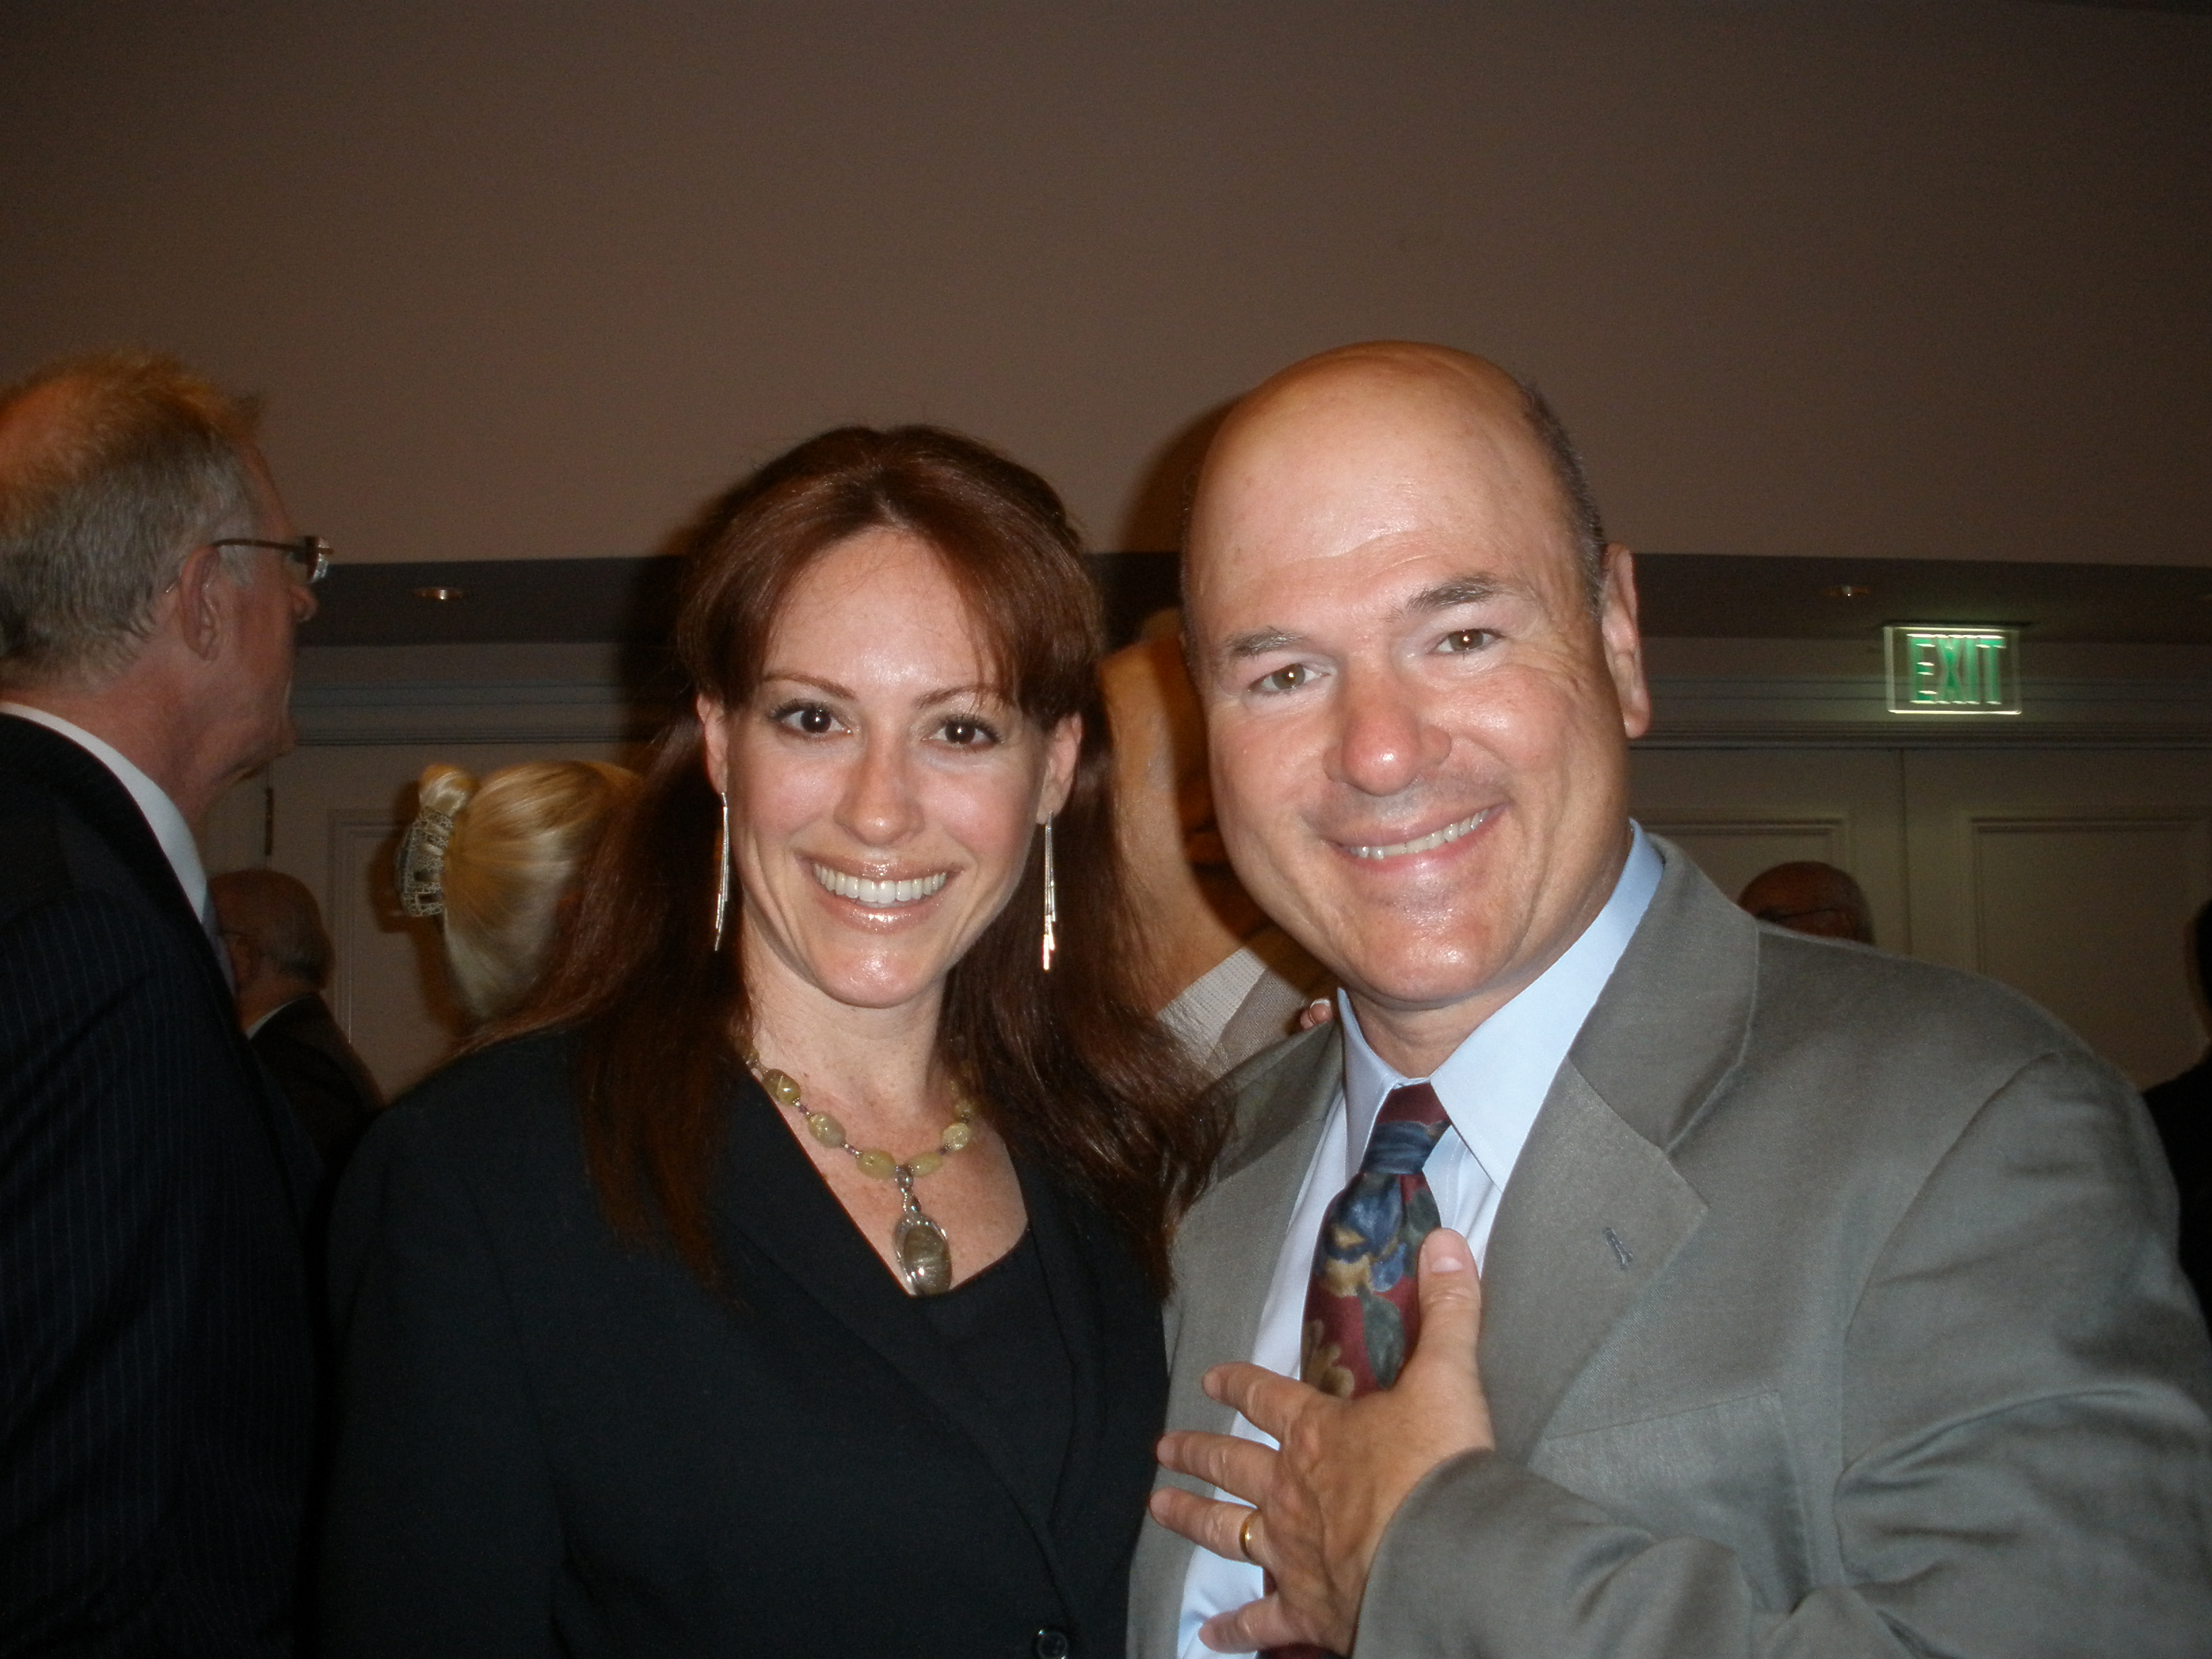 With Larry Miller